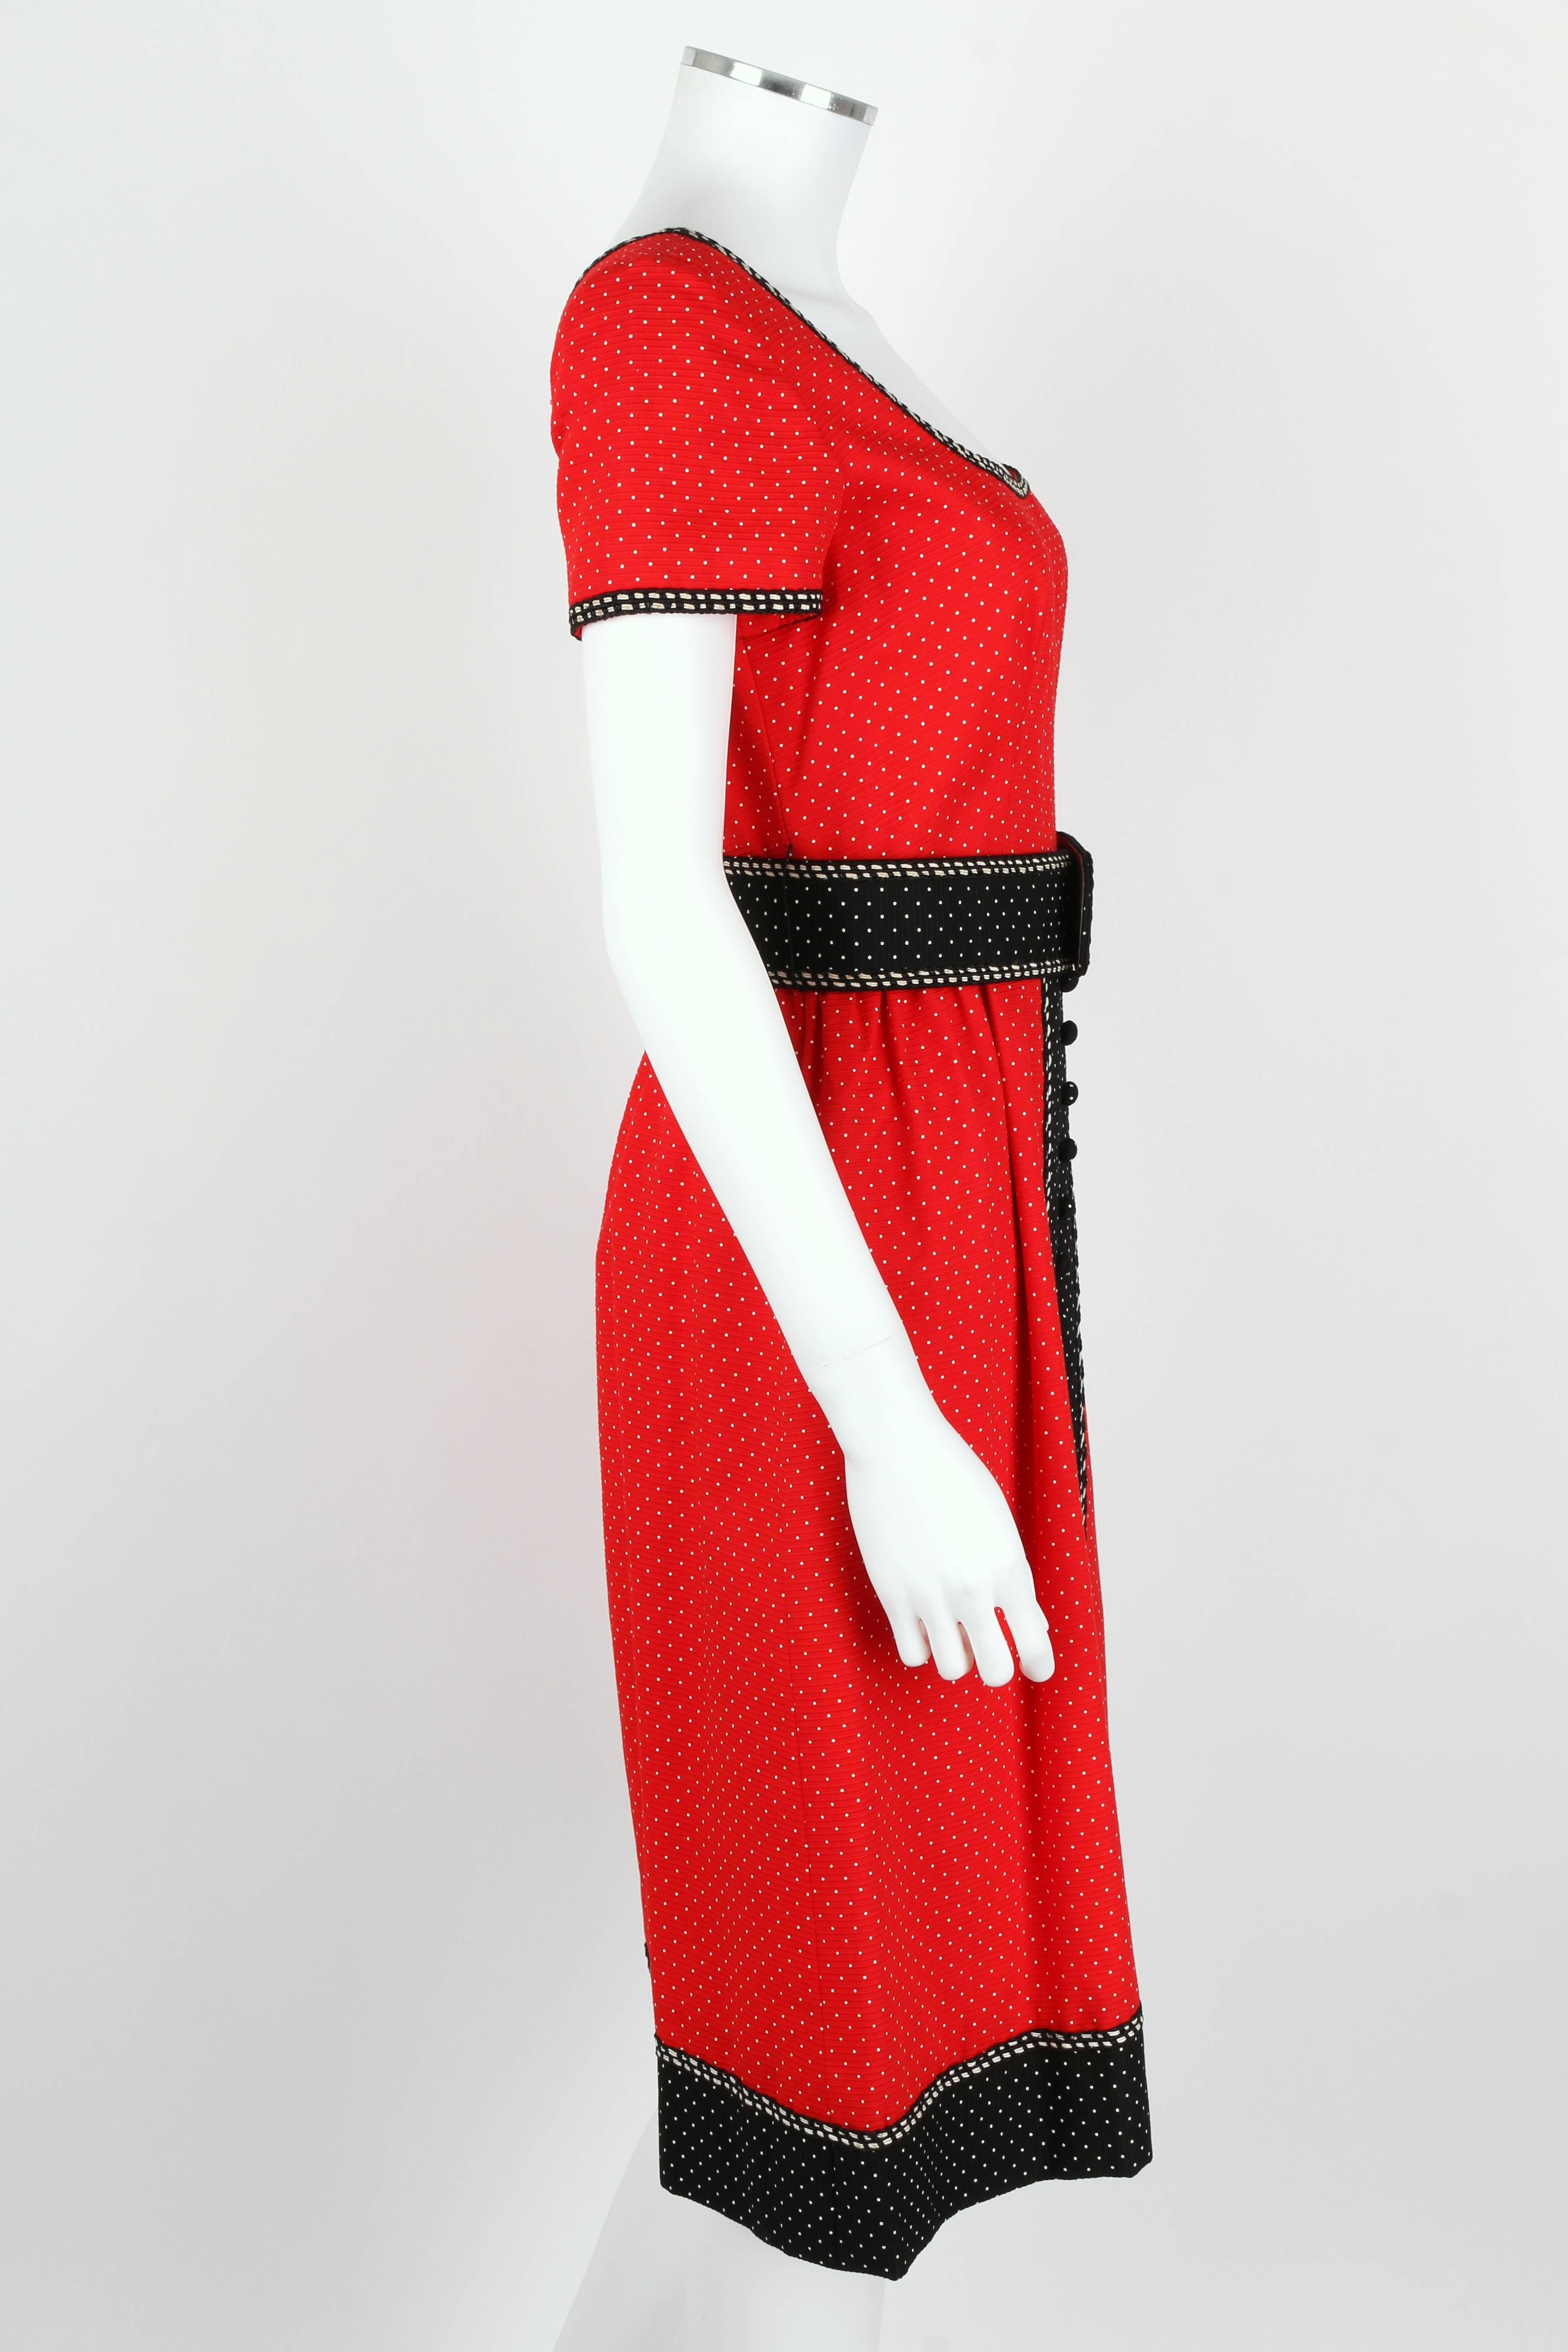 1960's Early OSCAR de la RENTA Boutique Red Polka Dot Short Sleeve Dress + Belt In Good Condition For Sale In Thiensville, WI